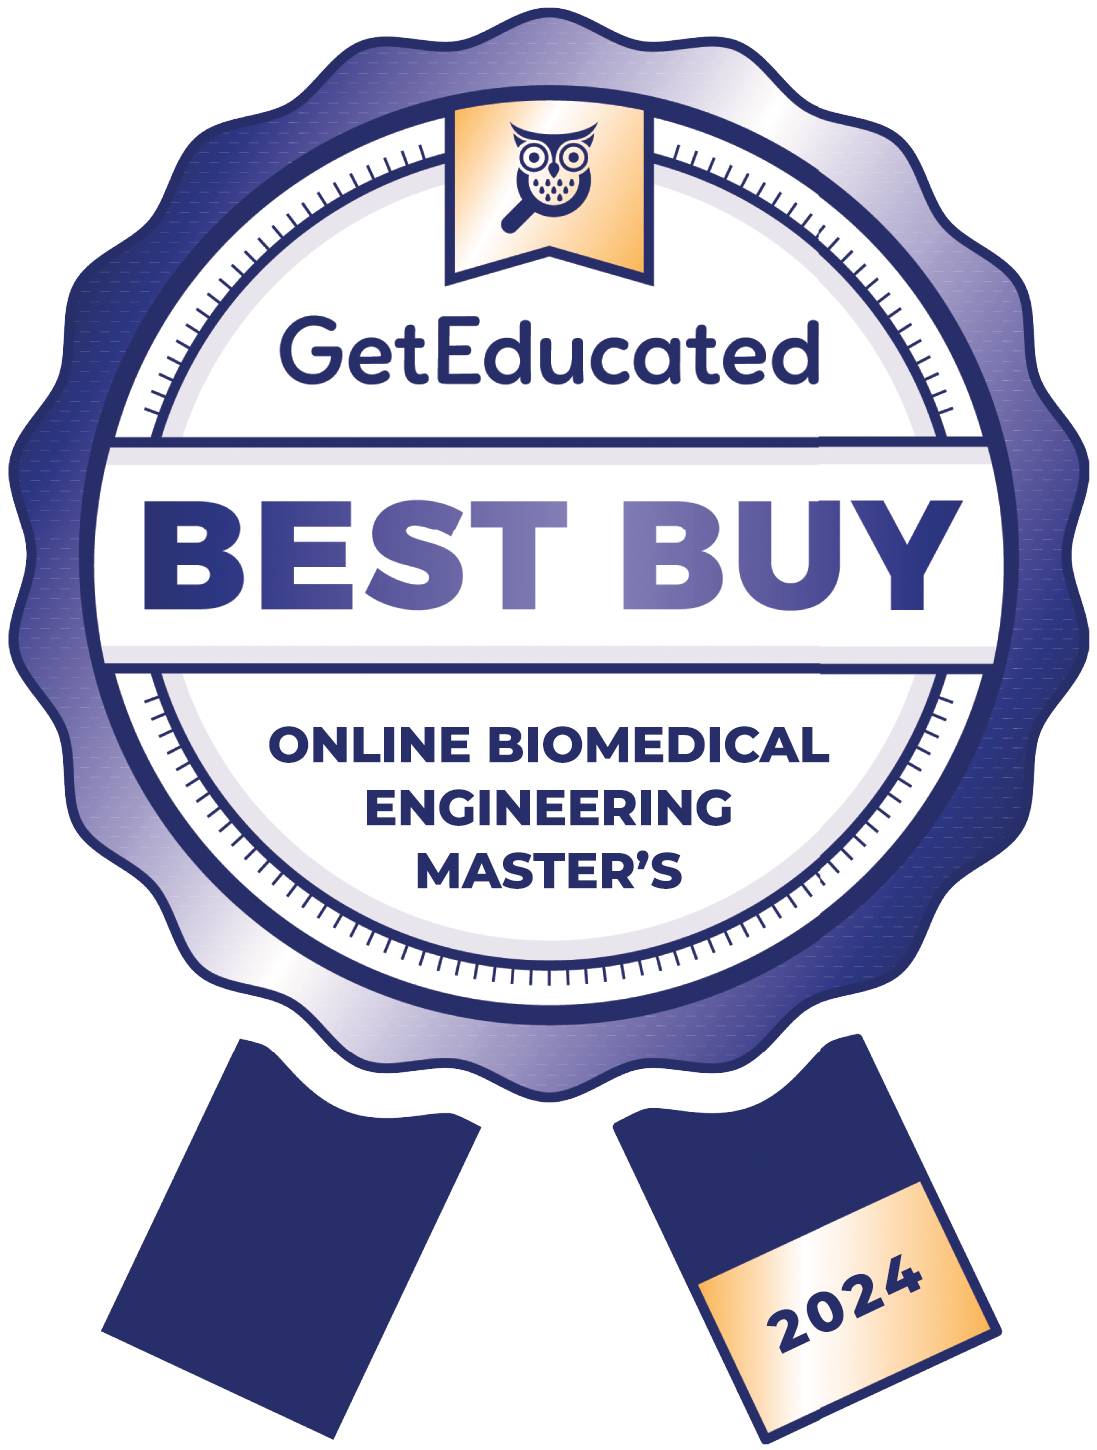 Rankings of the cheapest online biomedical engineering master's degrees